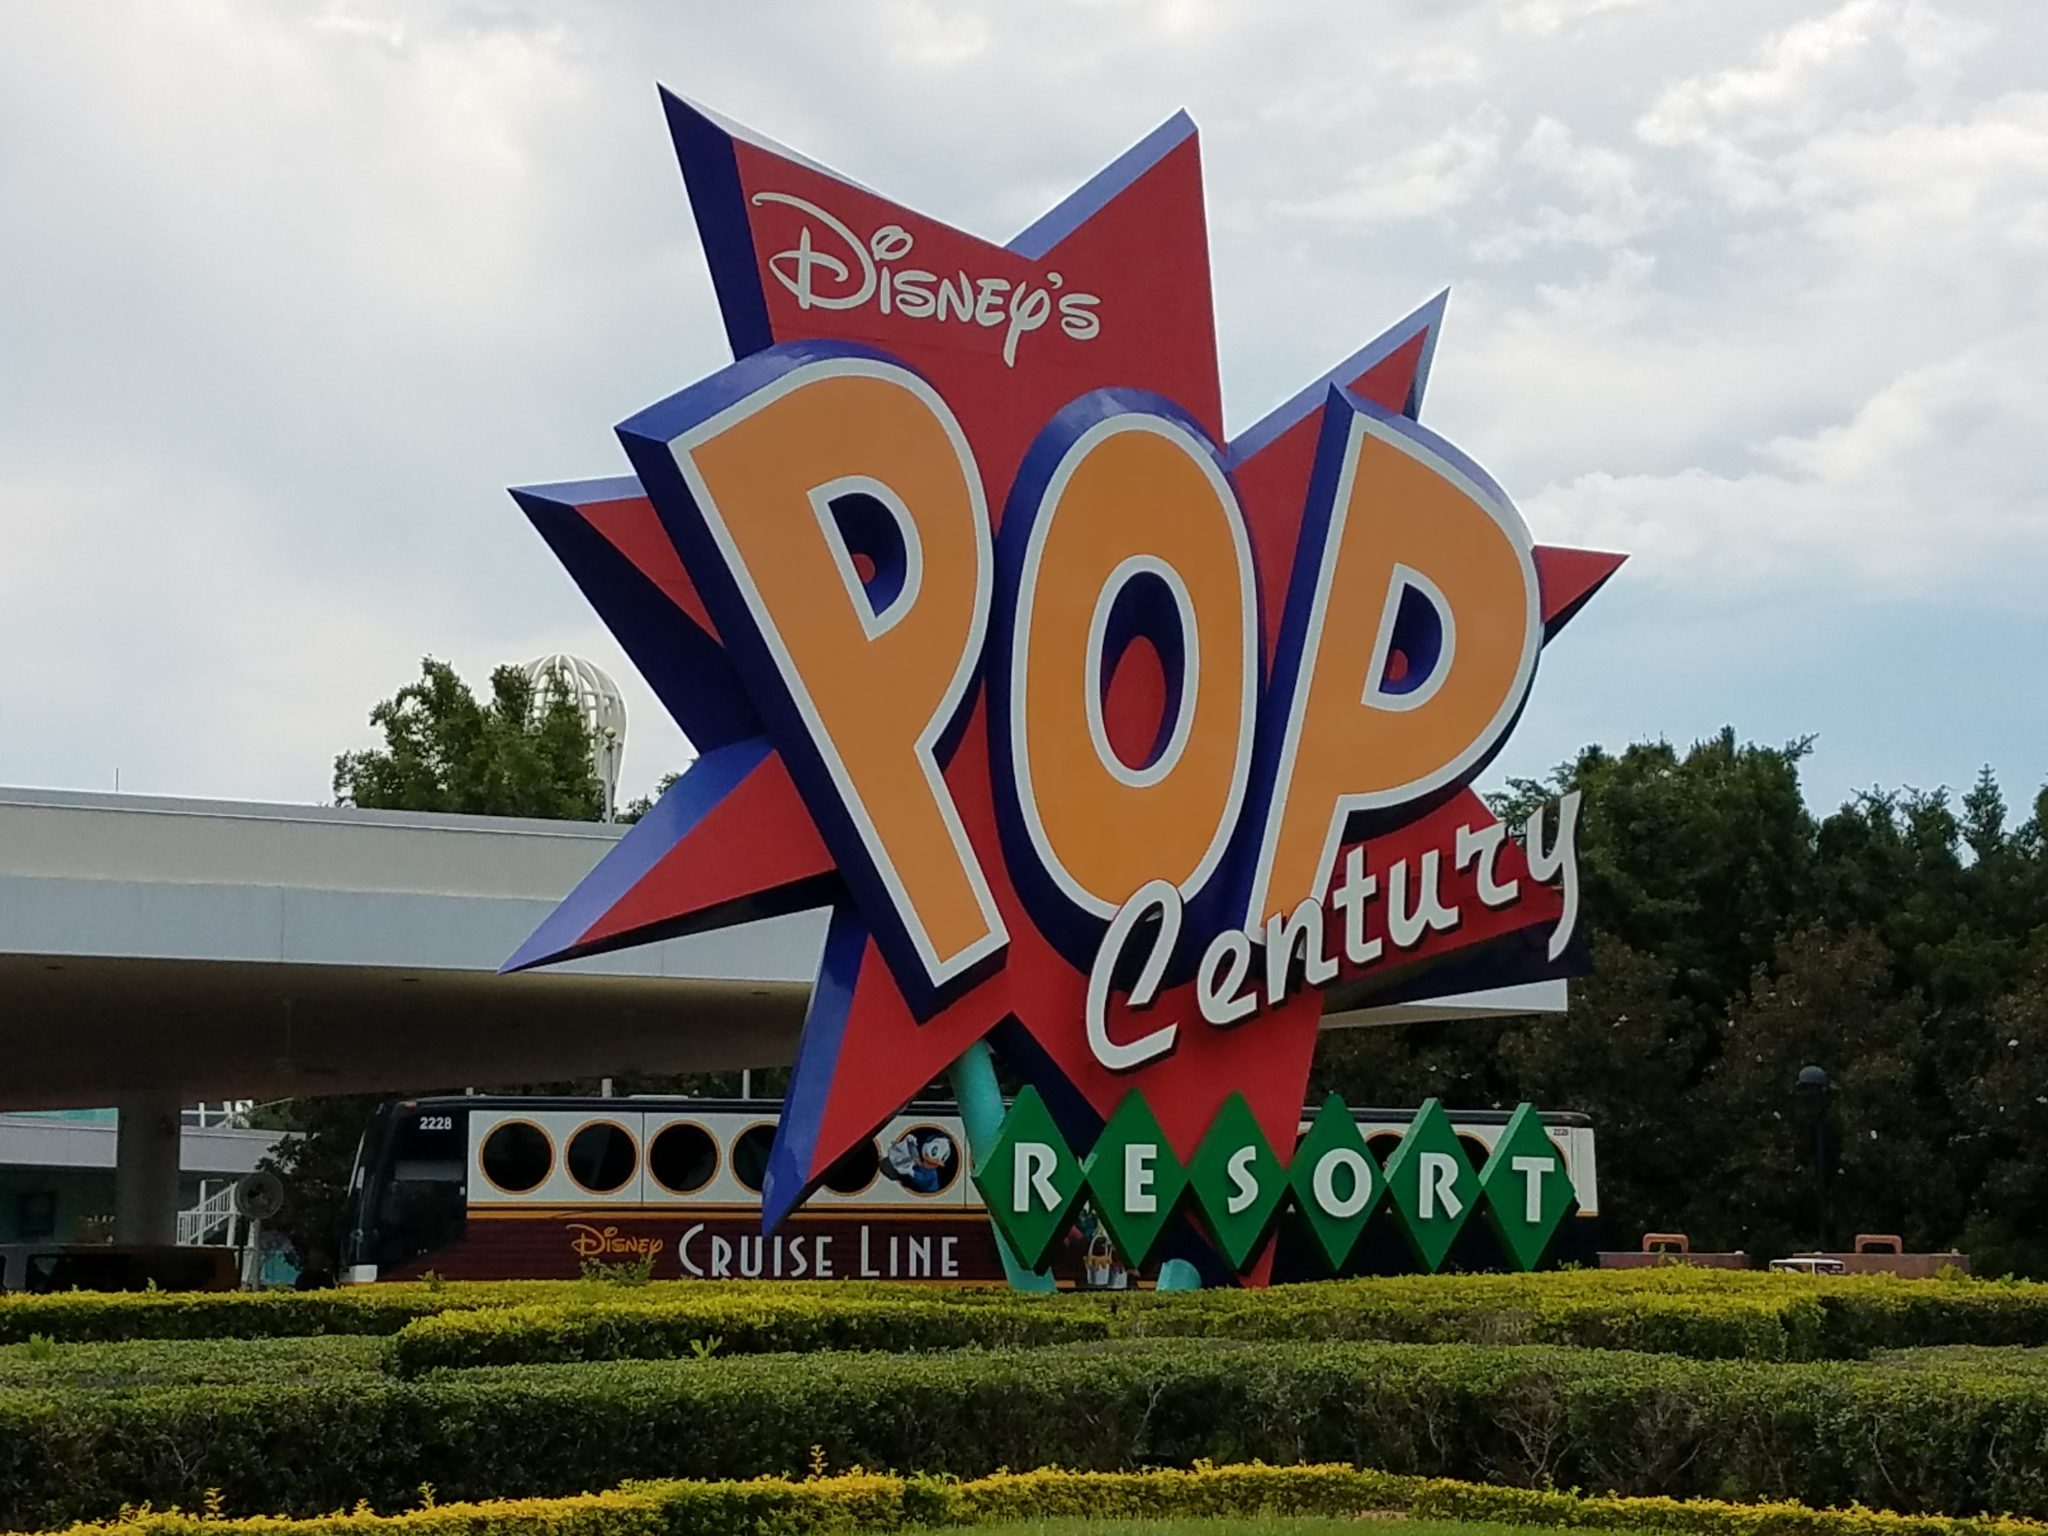 Pop Century Ups Their Dessert Game With Traditional Tasty Treats